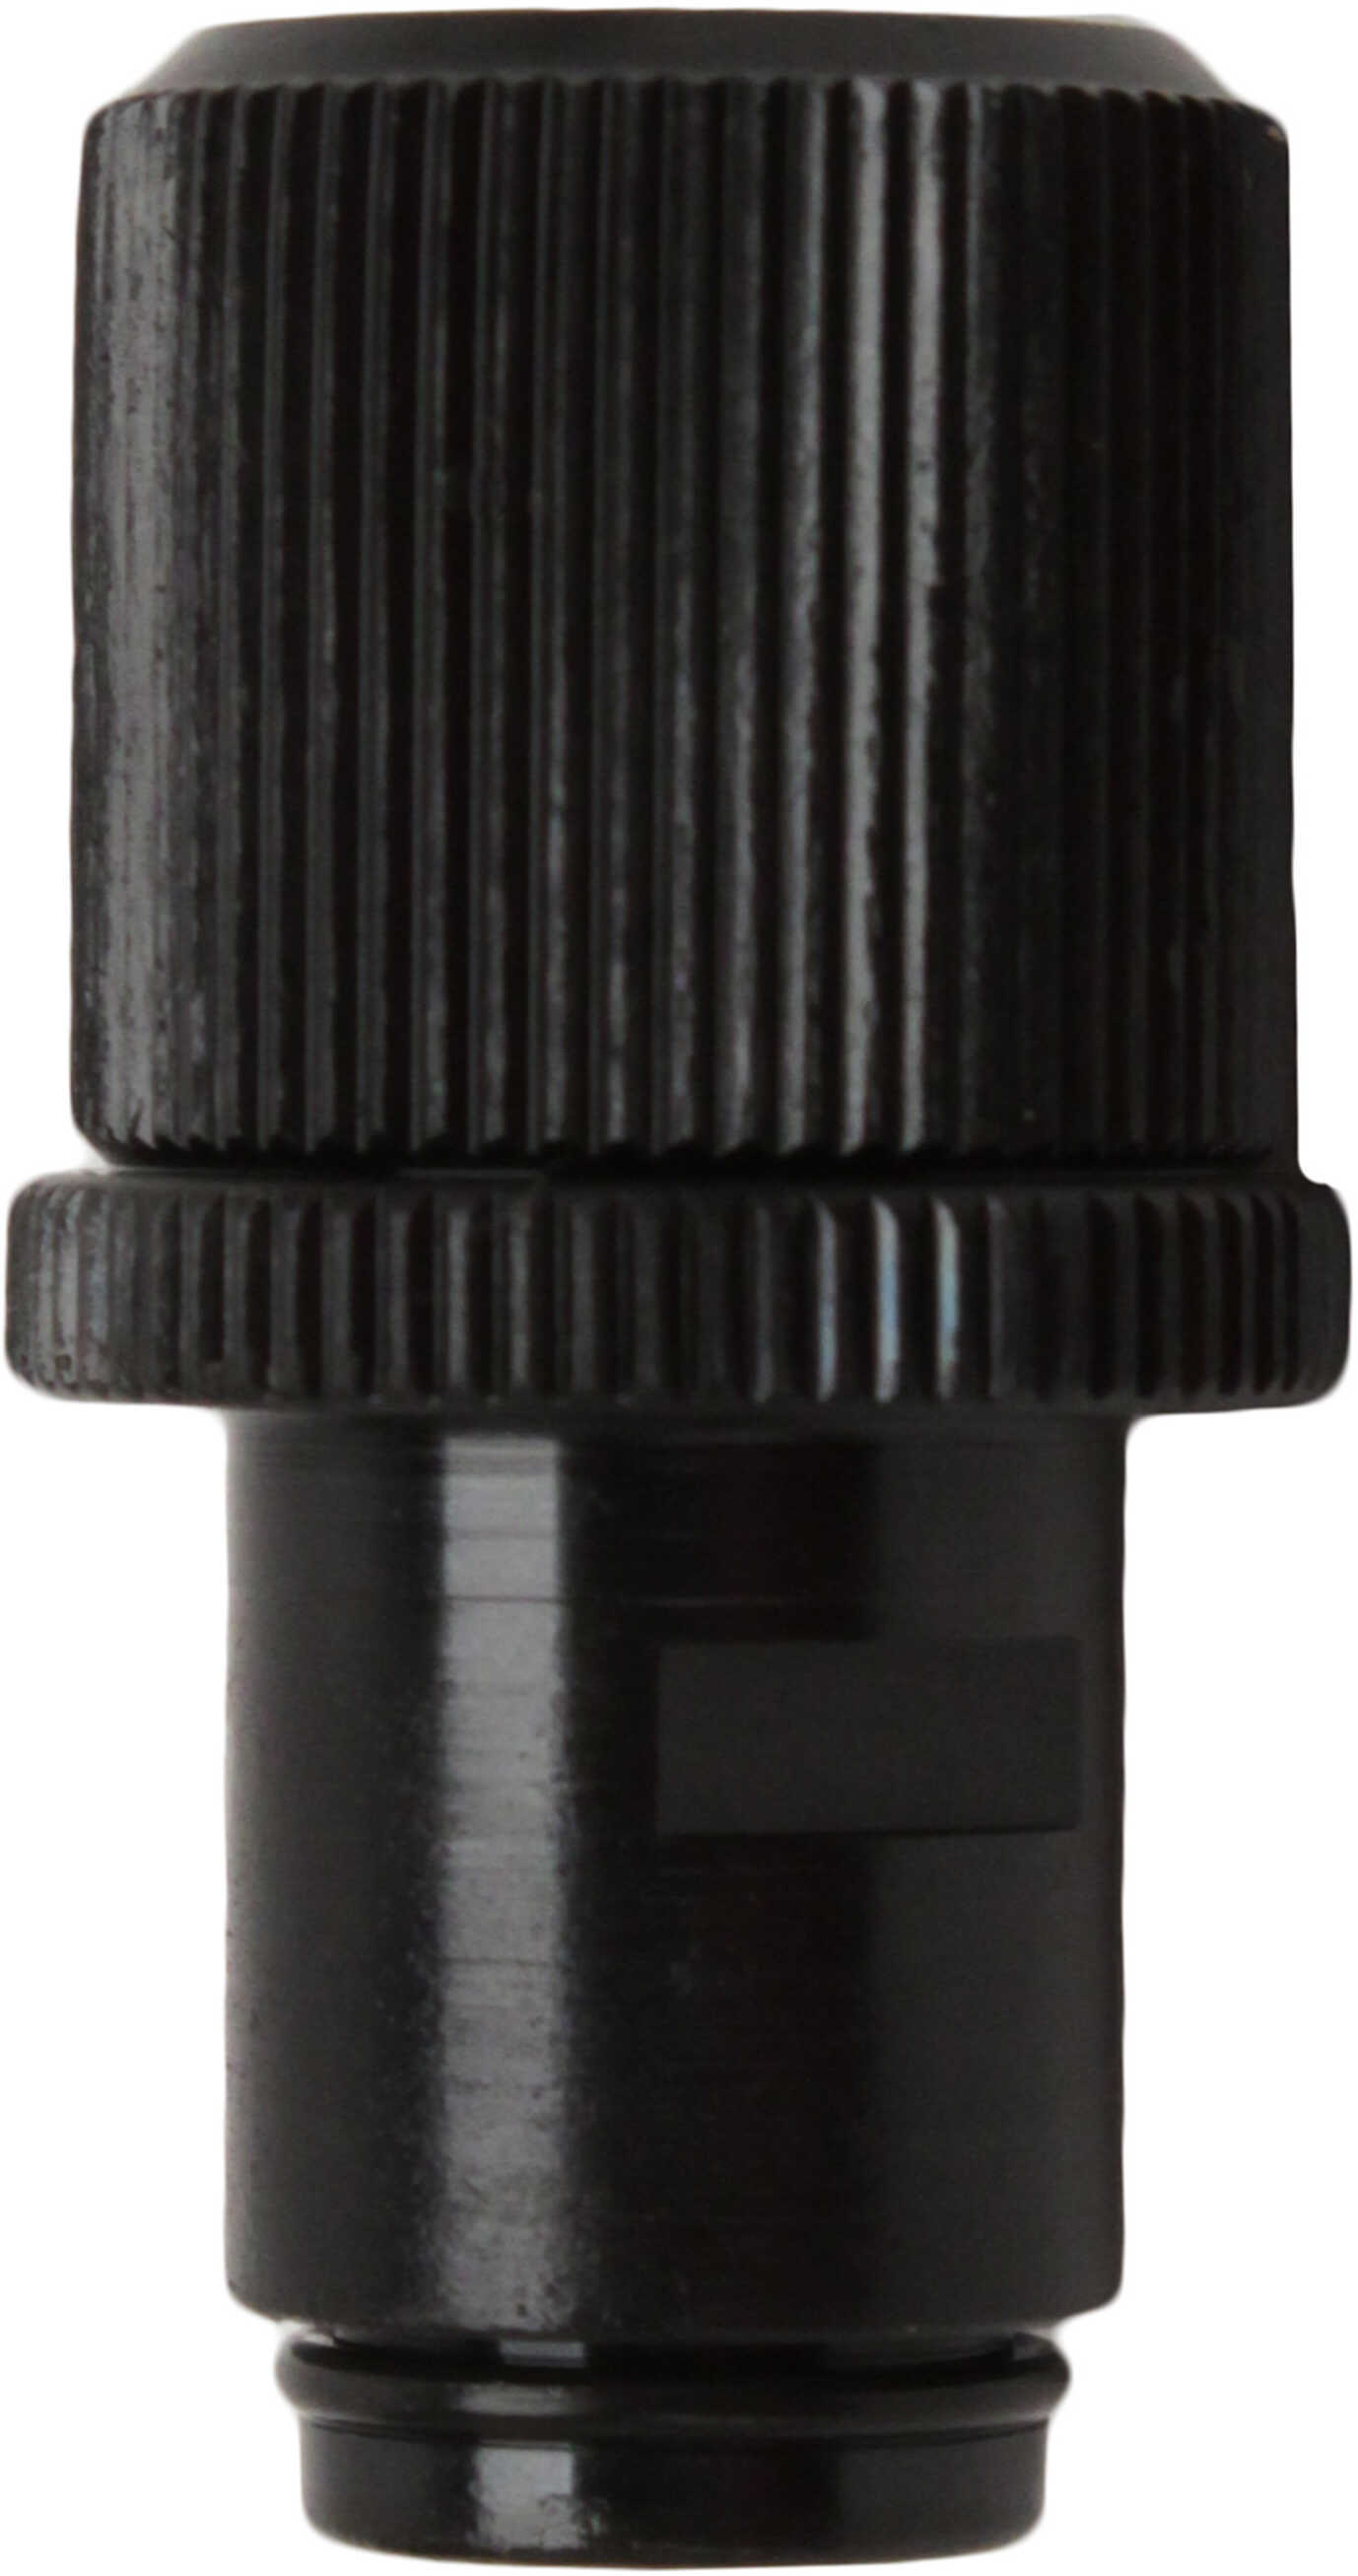 Walther Arms P22 Threaded Barrel Adapter 512105